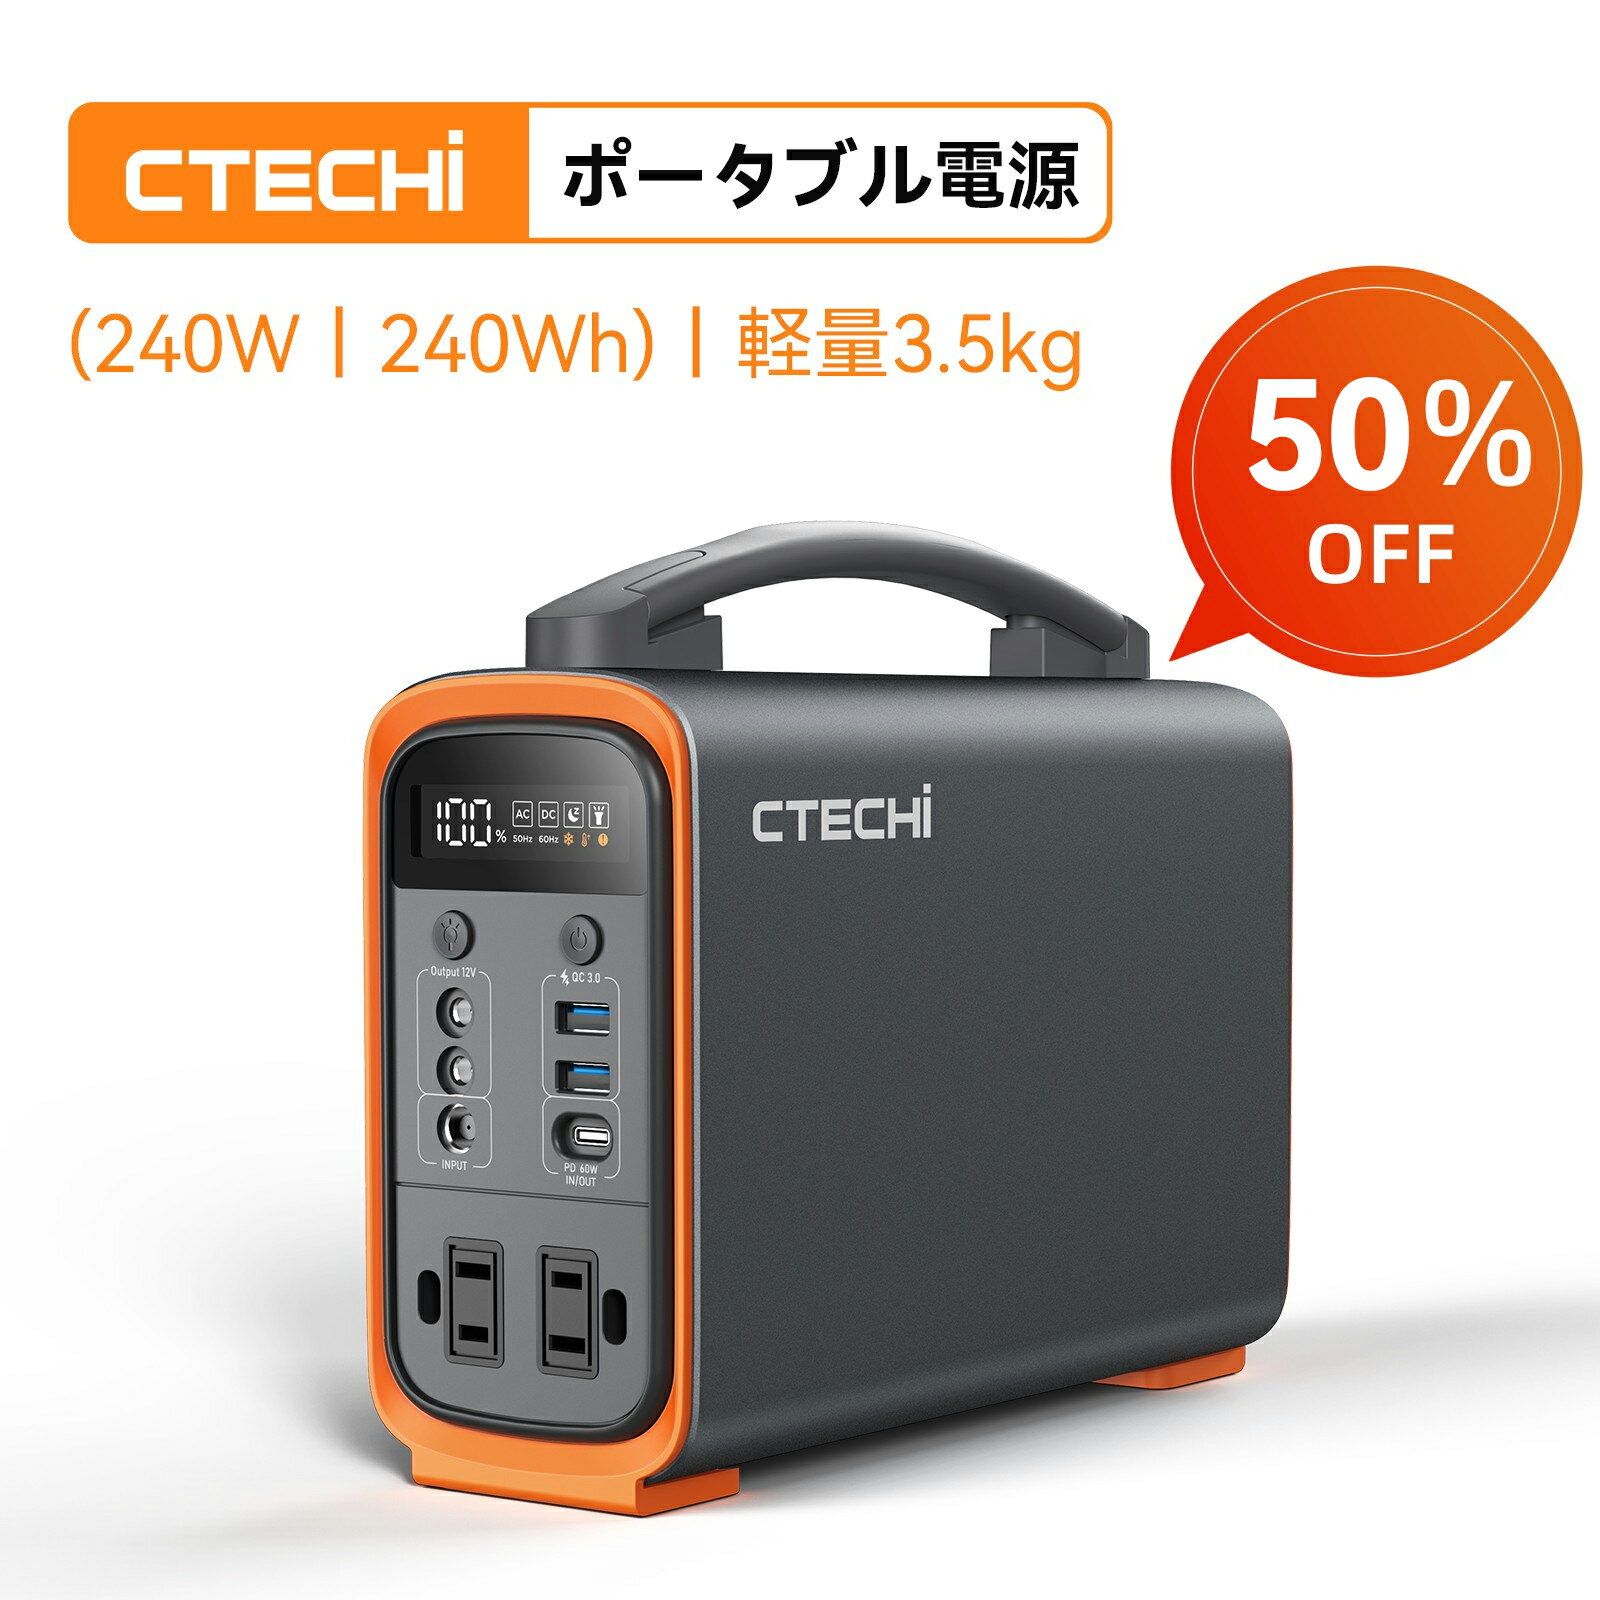 【50%OFFクーポンで17800円】 激安 CTECHi GT200 小型 ポータブル電源 <strong>240W</strong> リン酸鉄 <strong>240W</strong>h 家庭用 軽量3.5kg 長寿命 高速充電 ポータブルバッテリー 7Way出力 AC/DC/USB出力 ソーラーパネル充電 ポタ電 車中泊 キャンプ 防災グッズ 停電対策 台風 バックアップ電源